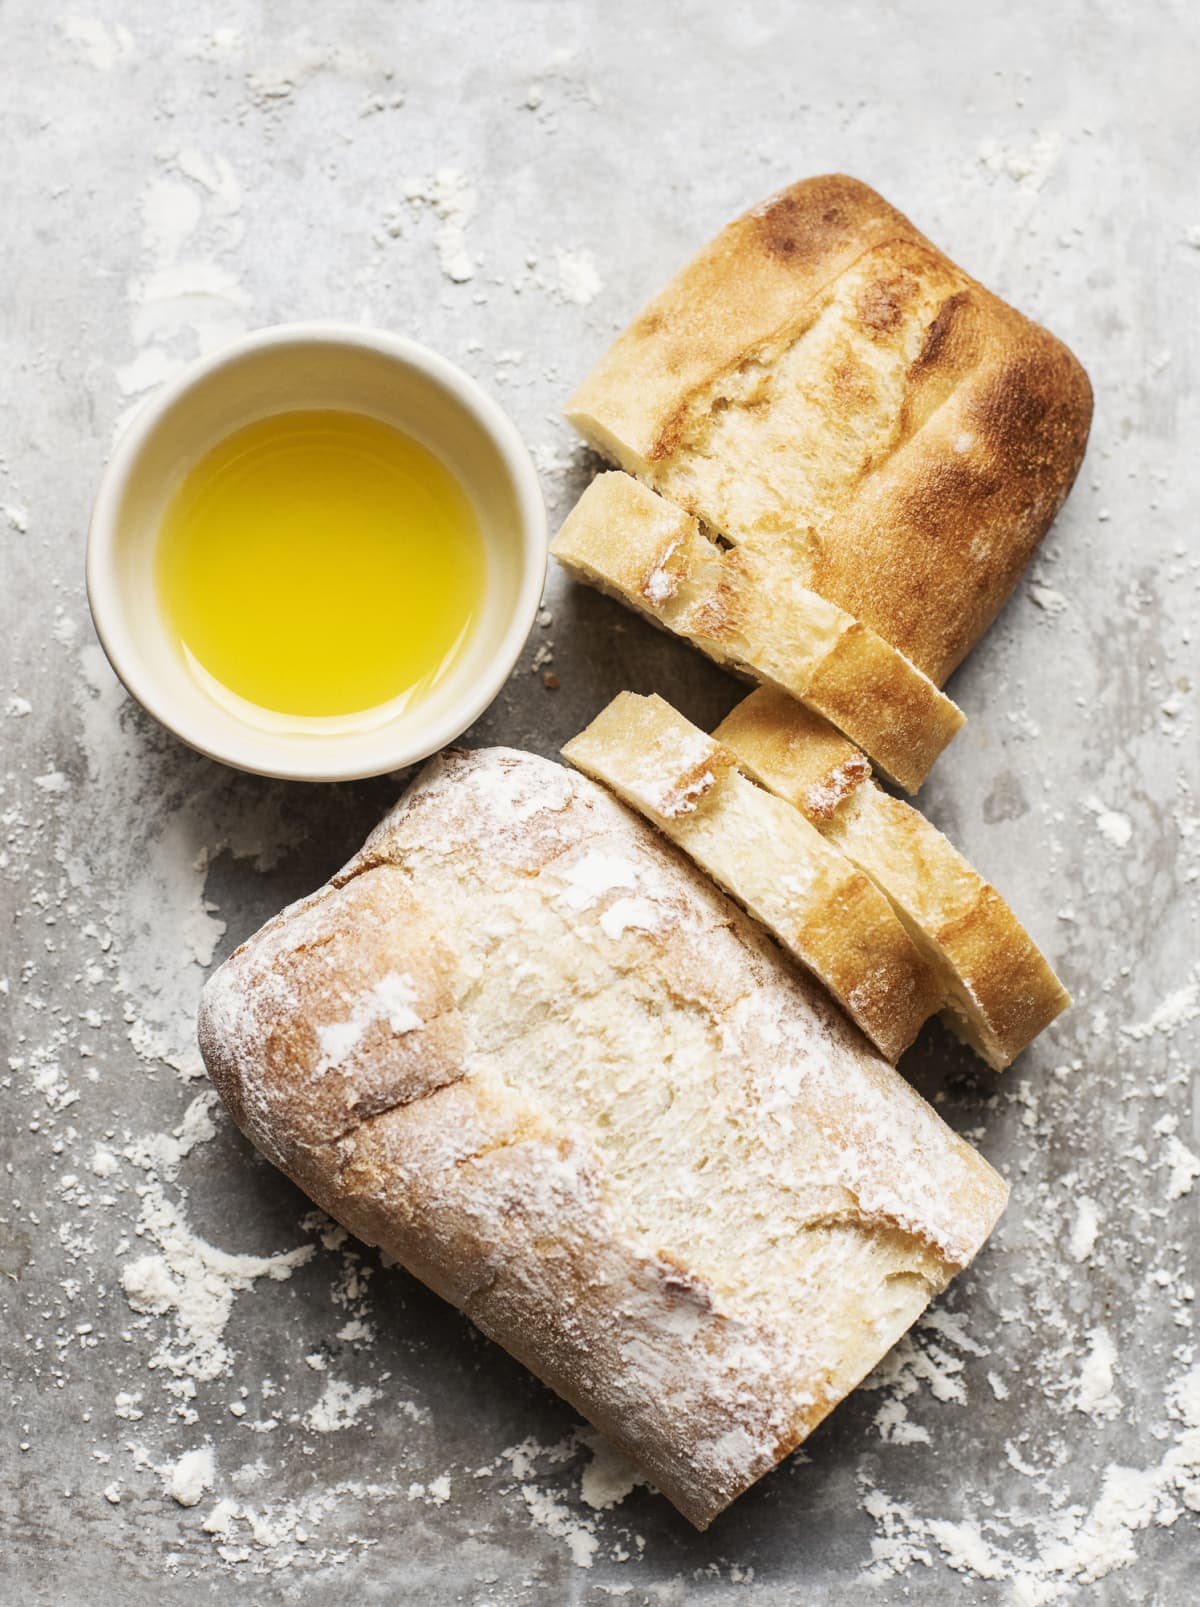 Sliced sourdough bread and olive oil for dipping